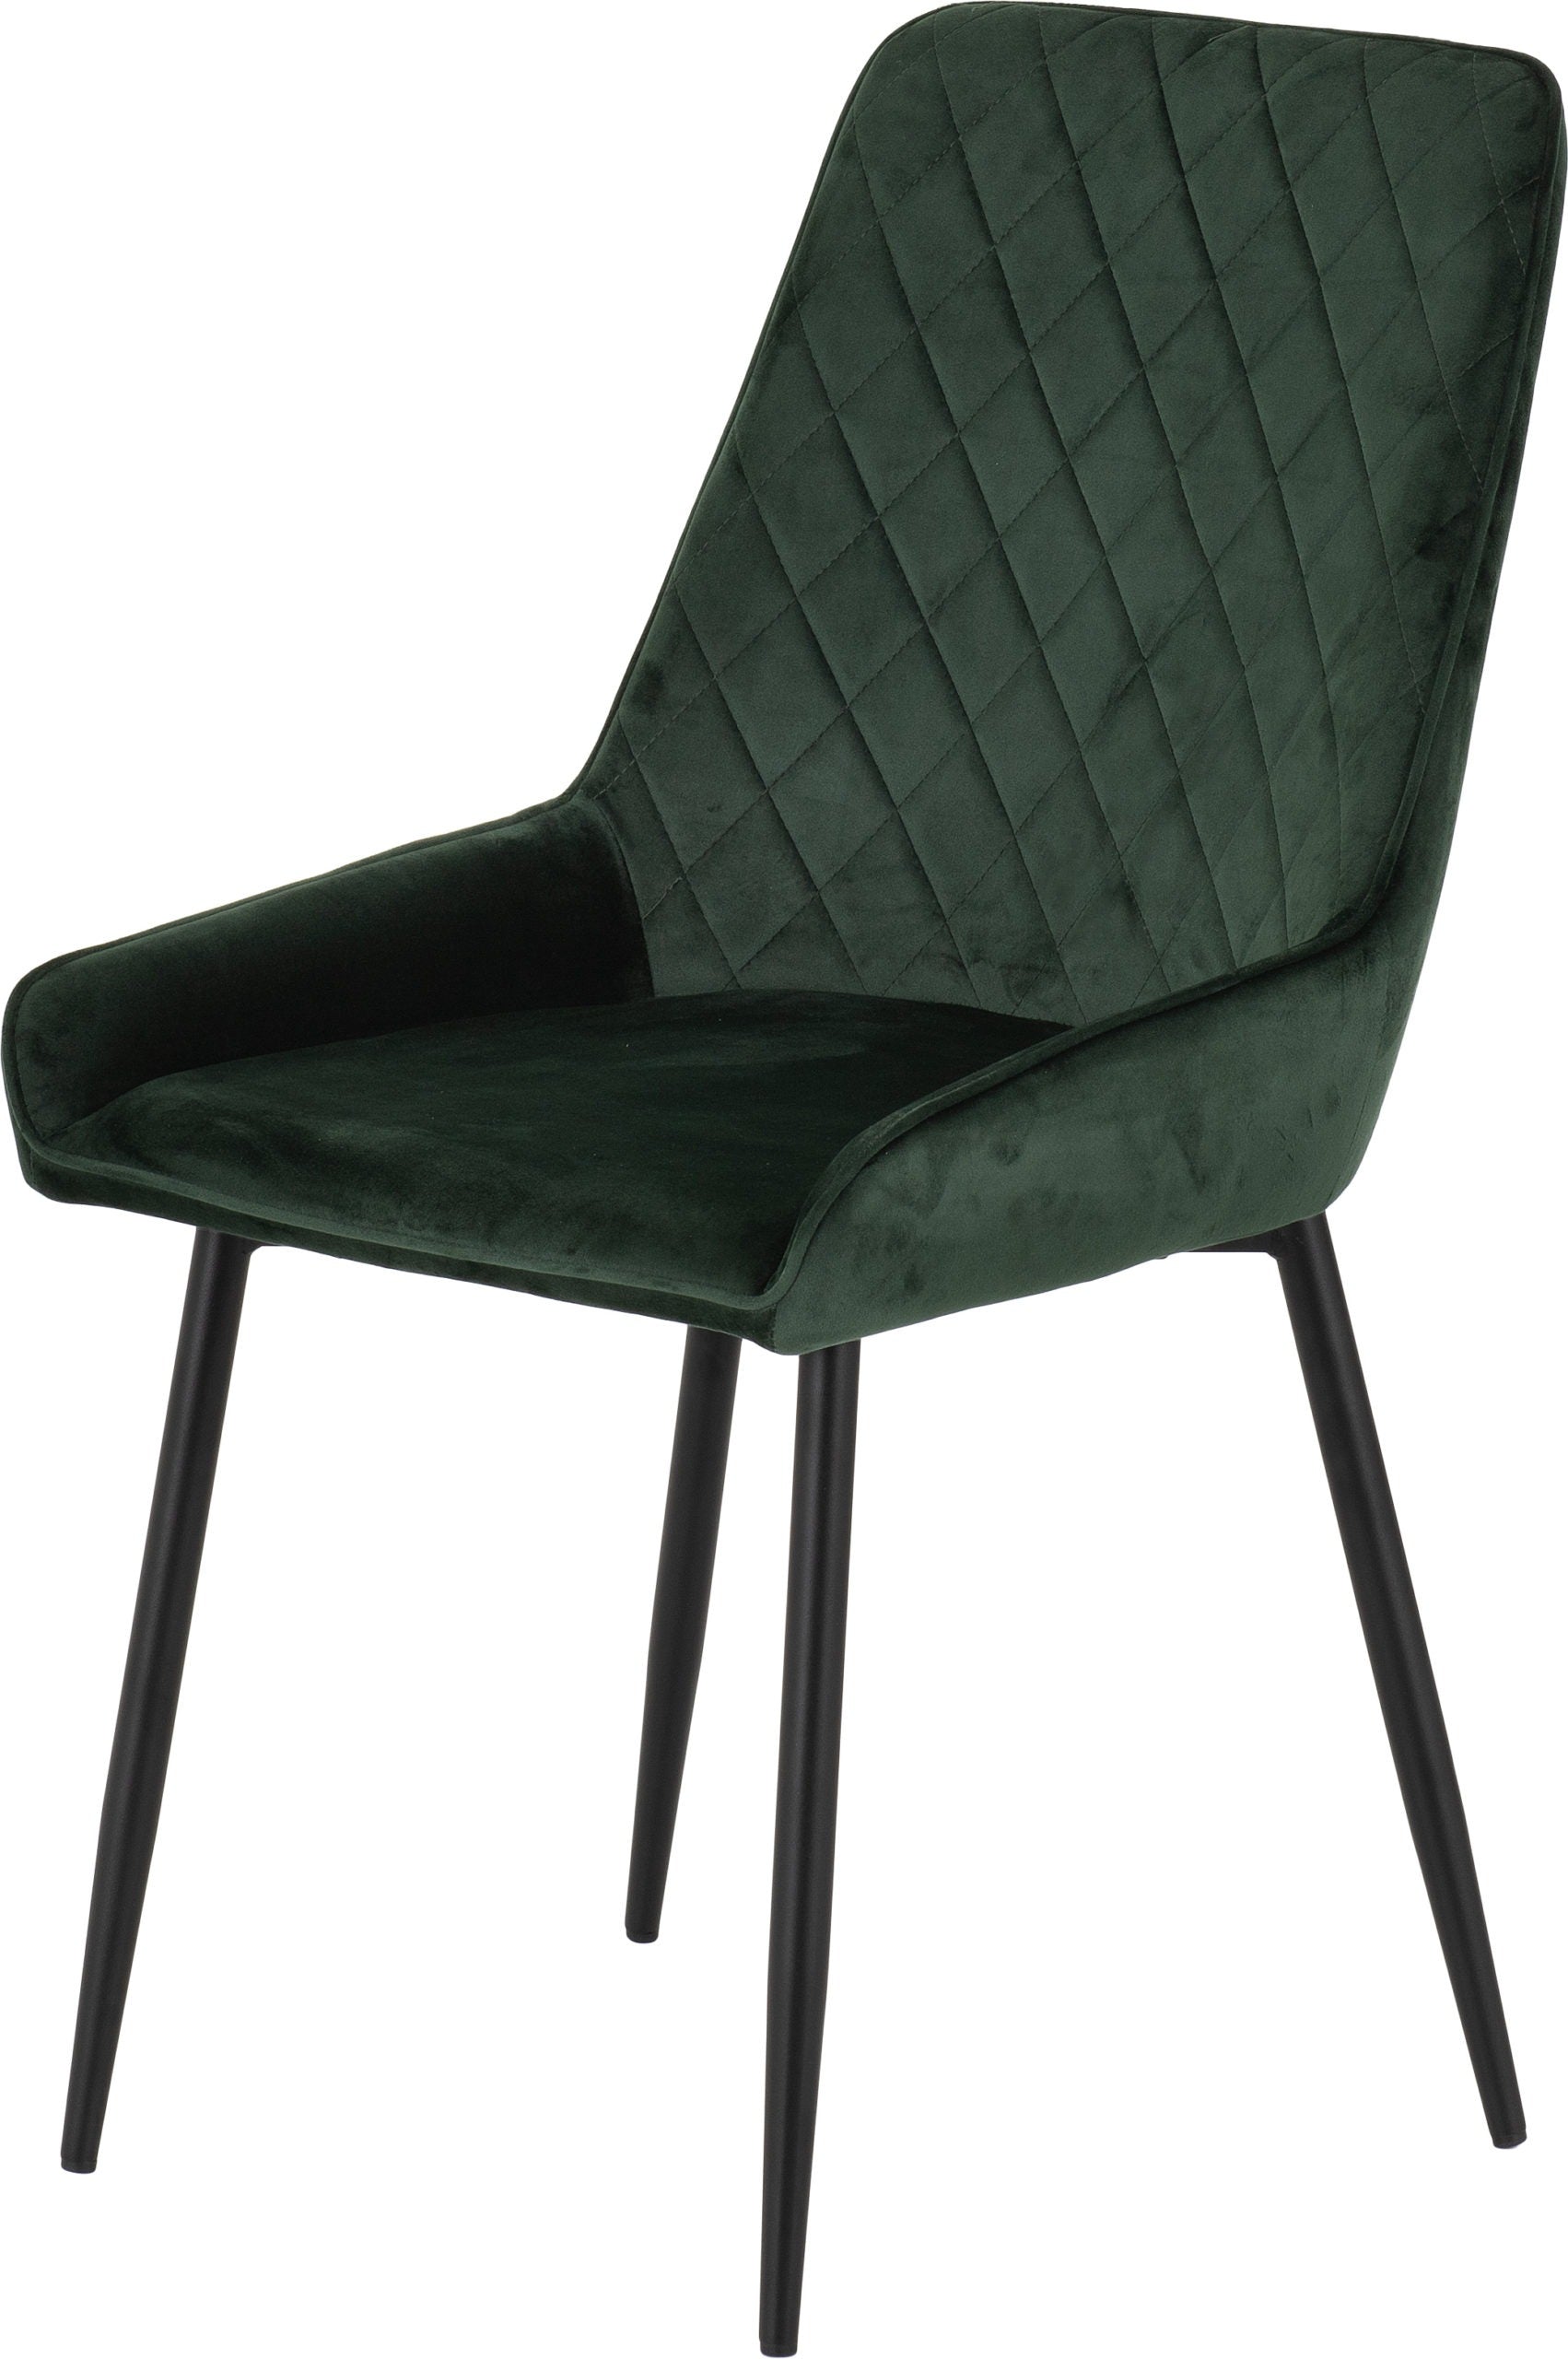  Treviso Dining Set with Avery Chairs in Emerald Green Velvet